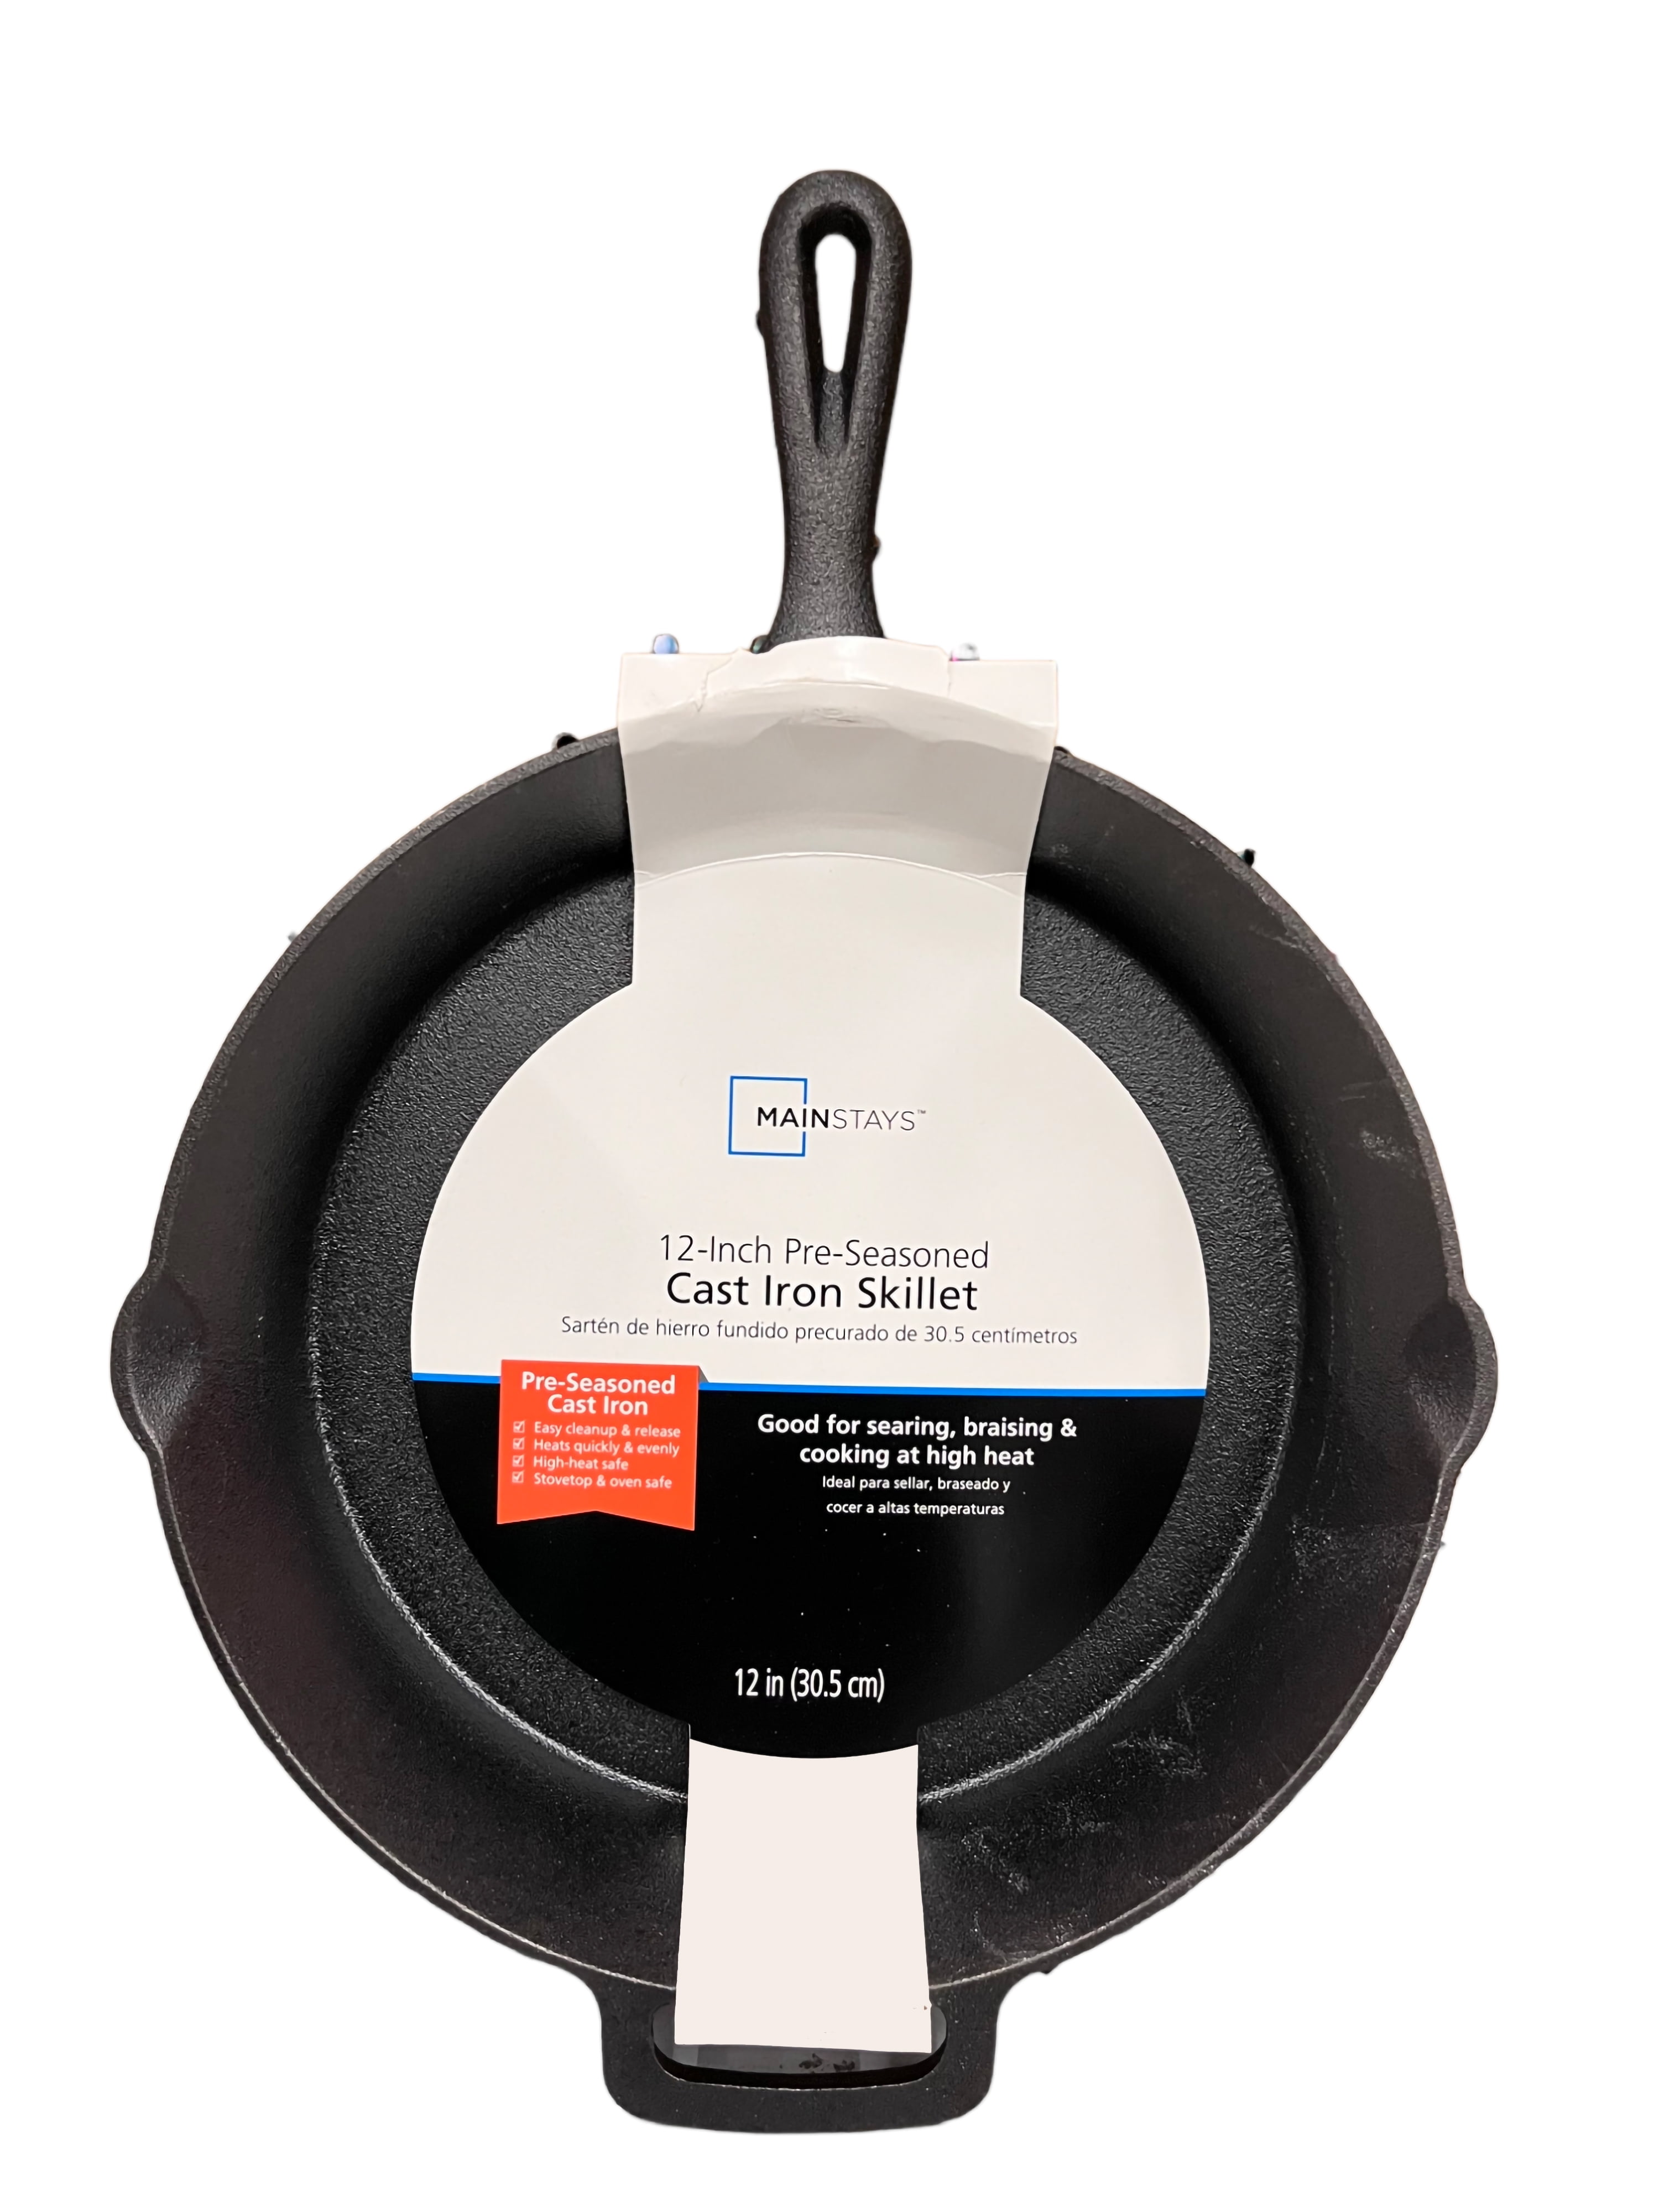  Cast Iron Skillet - 12 Inch Versatile and Durable Cast Iron Pan  - Multi Use Premium Quality Kitchen Pans - Pre-Seasoned Round Big Frying Pan  for Oven, Grill, Stove, Oven: Home